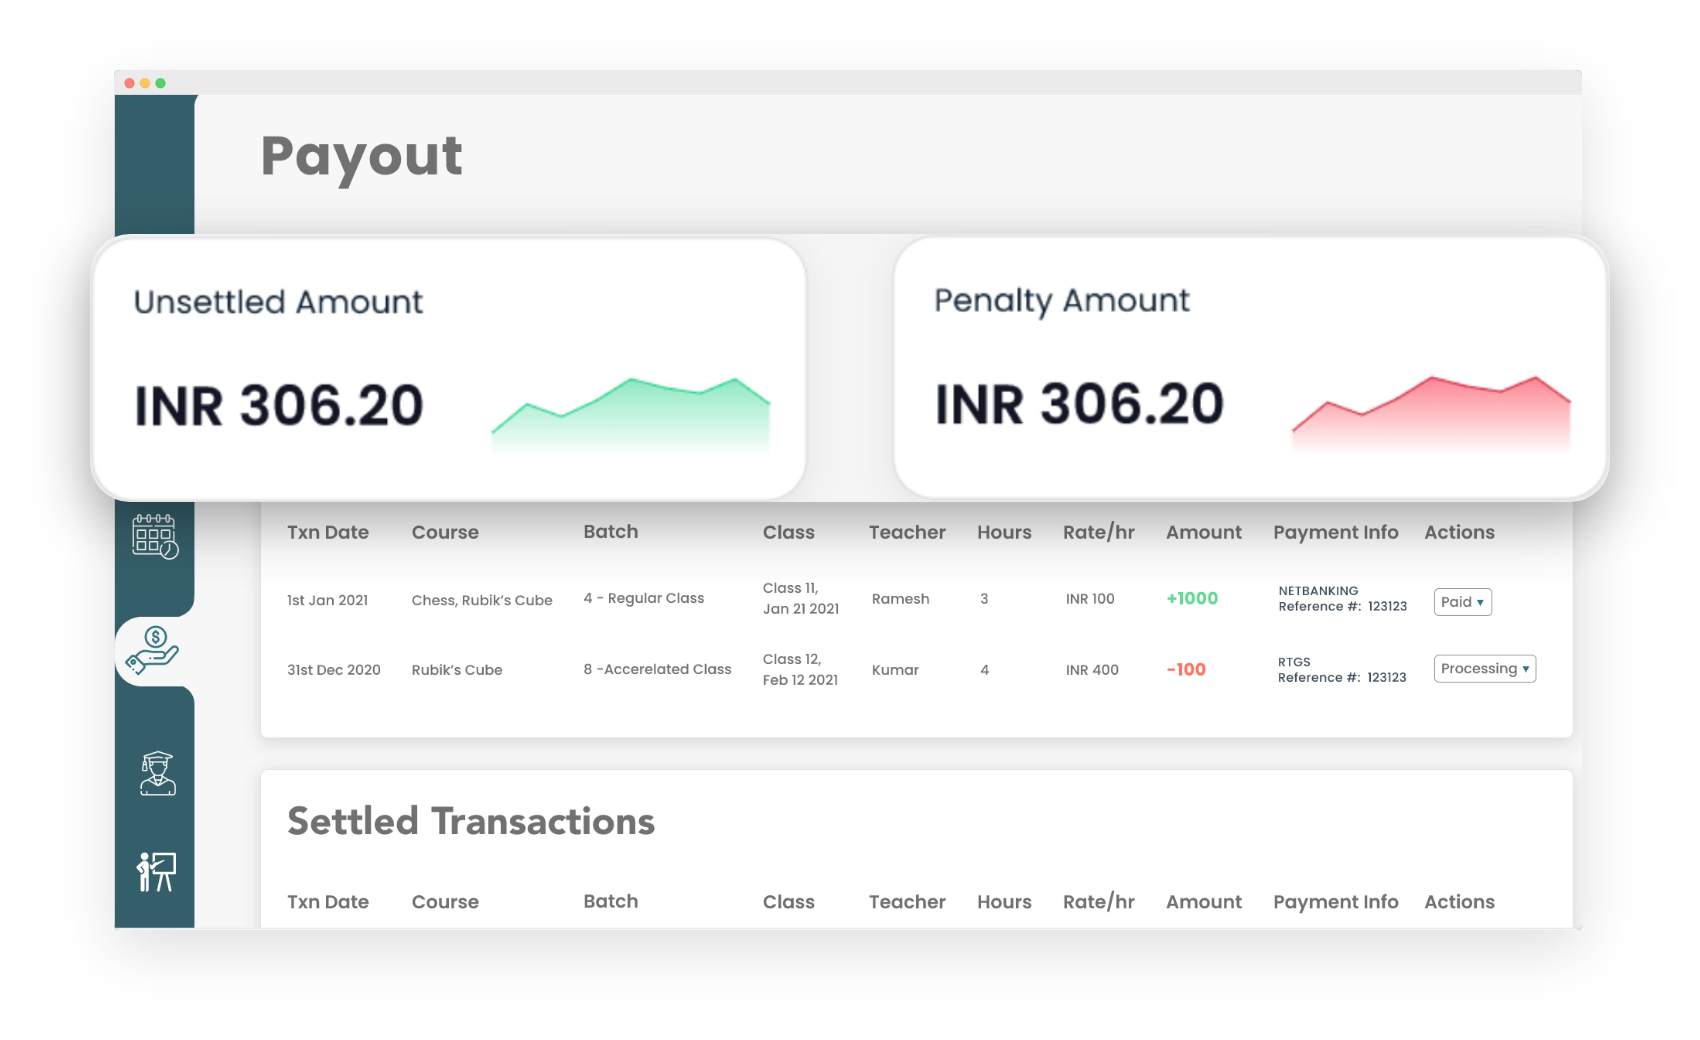 Payouts & Payments